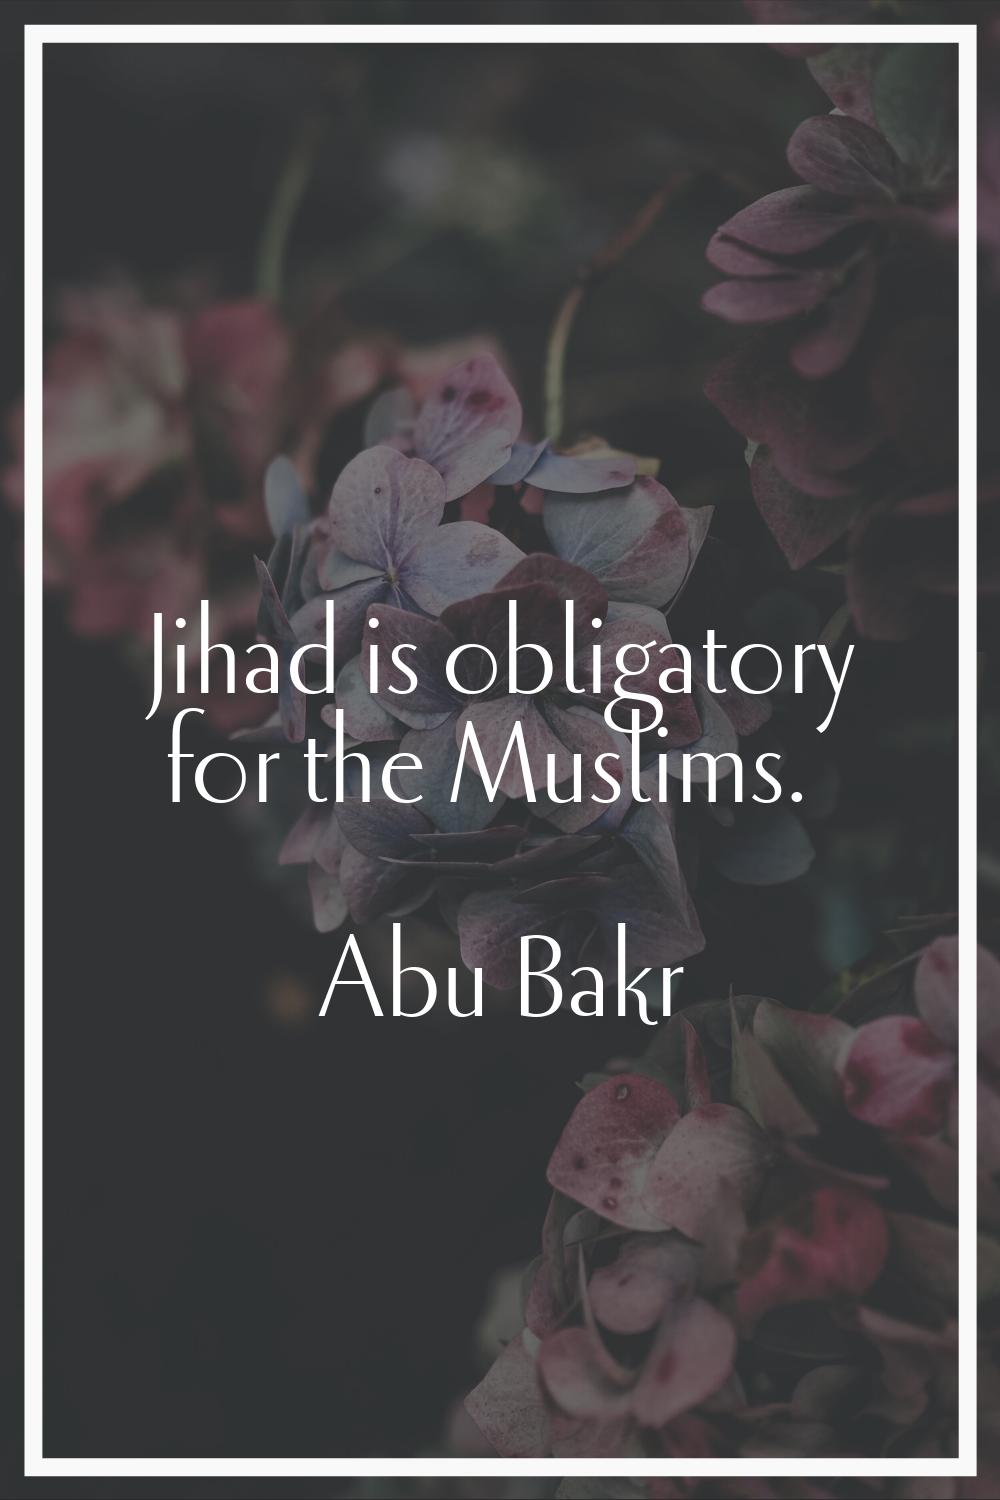 Jihad is obligatory for the Muslims.